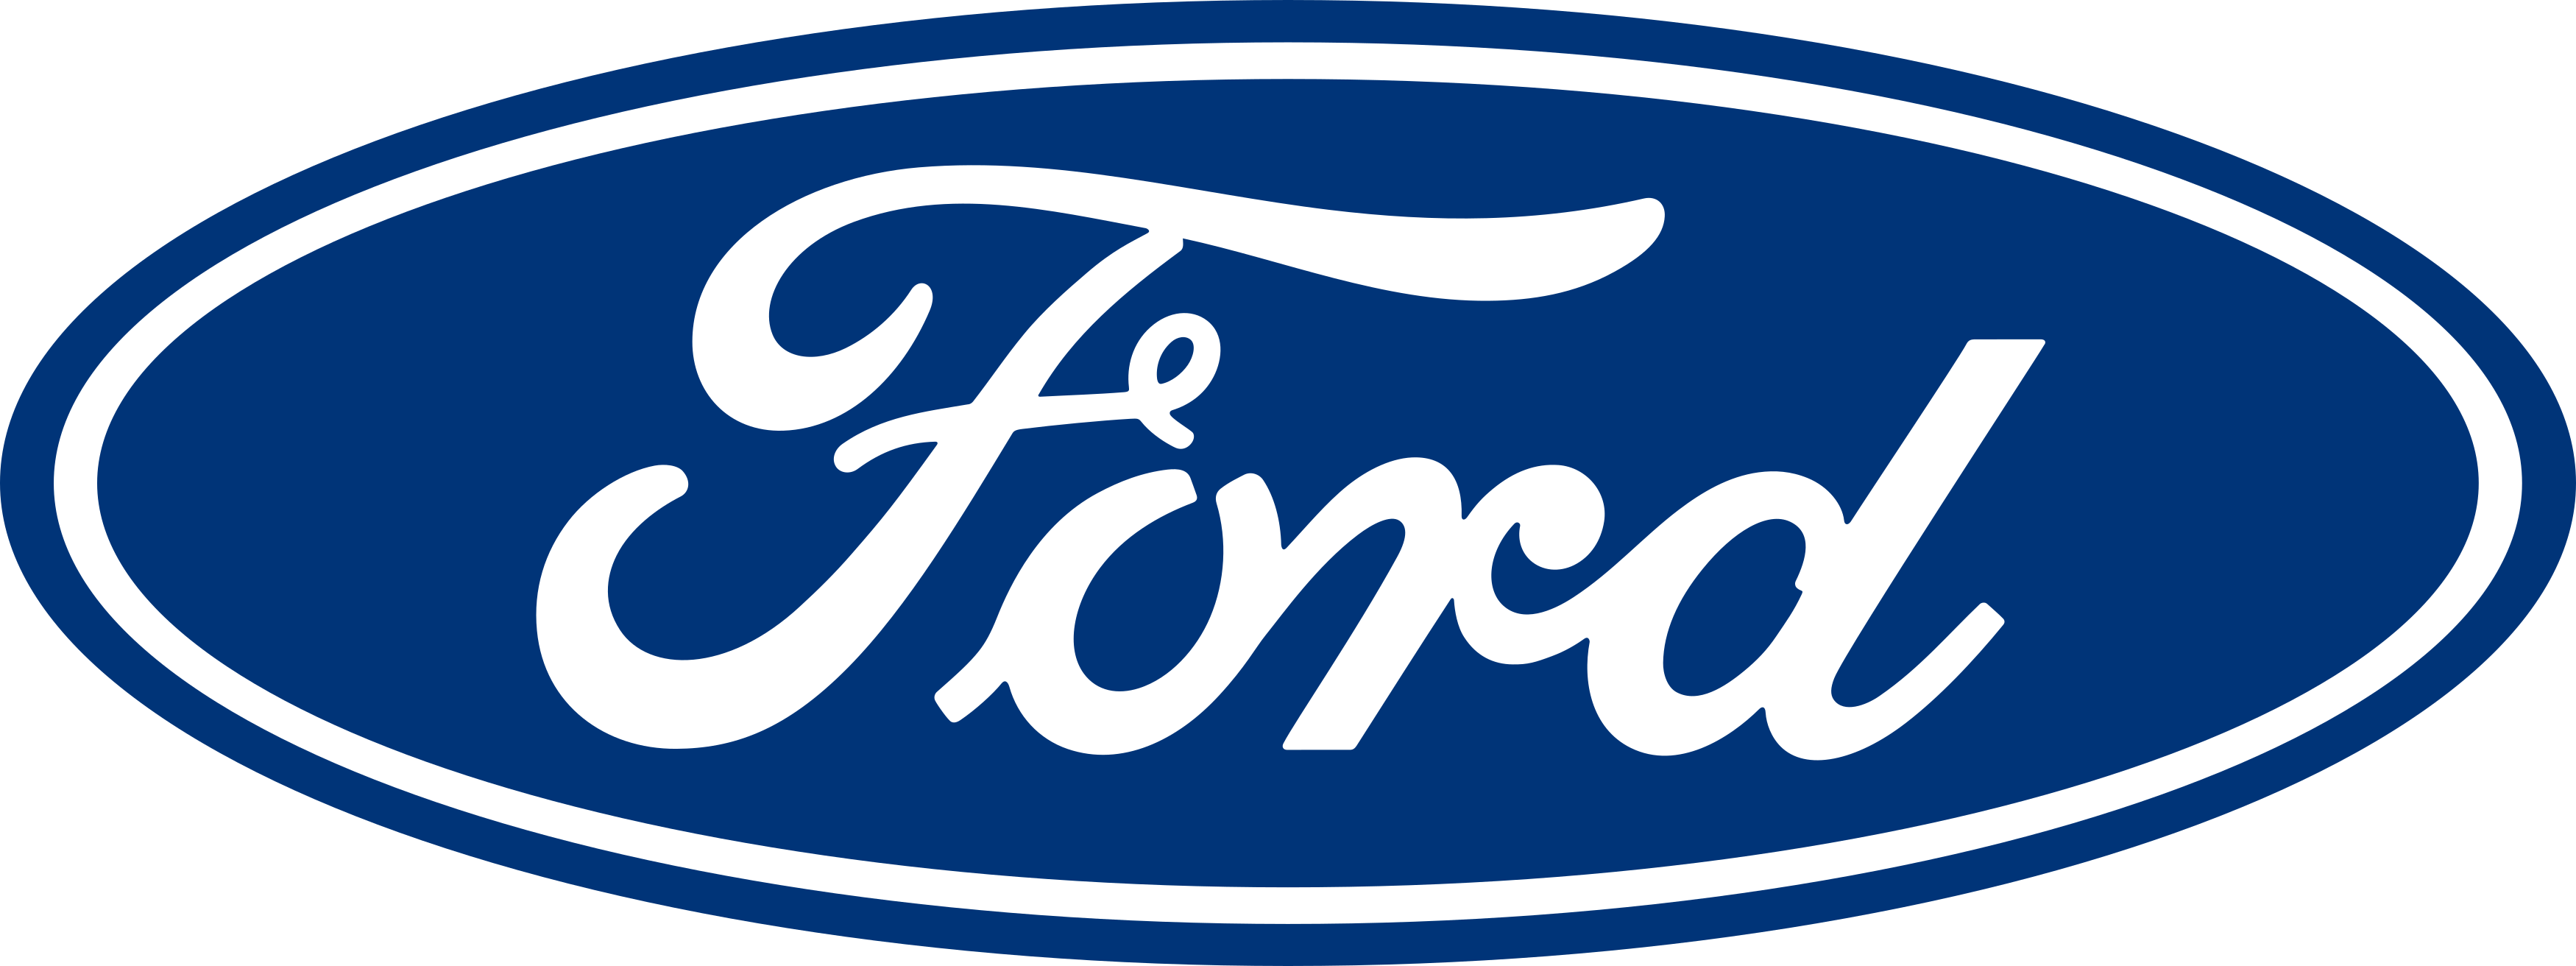 ford-logo-1-1.png